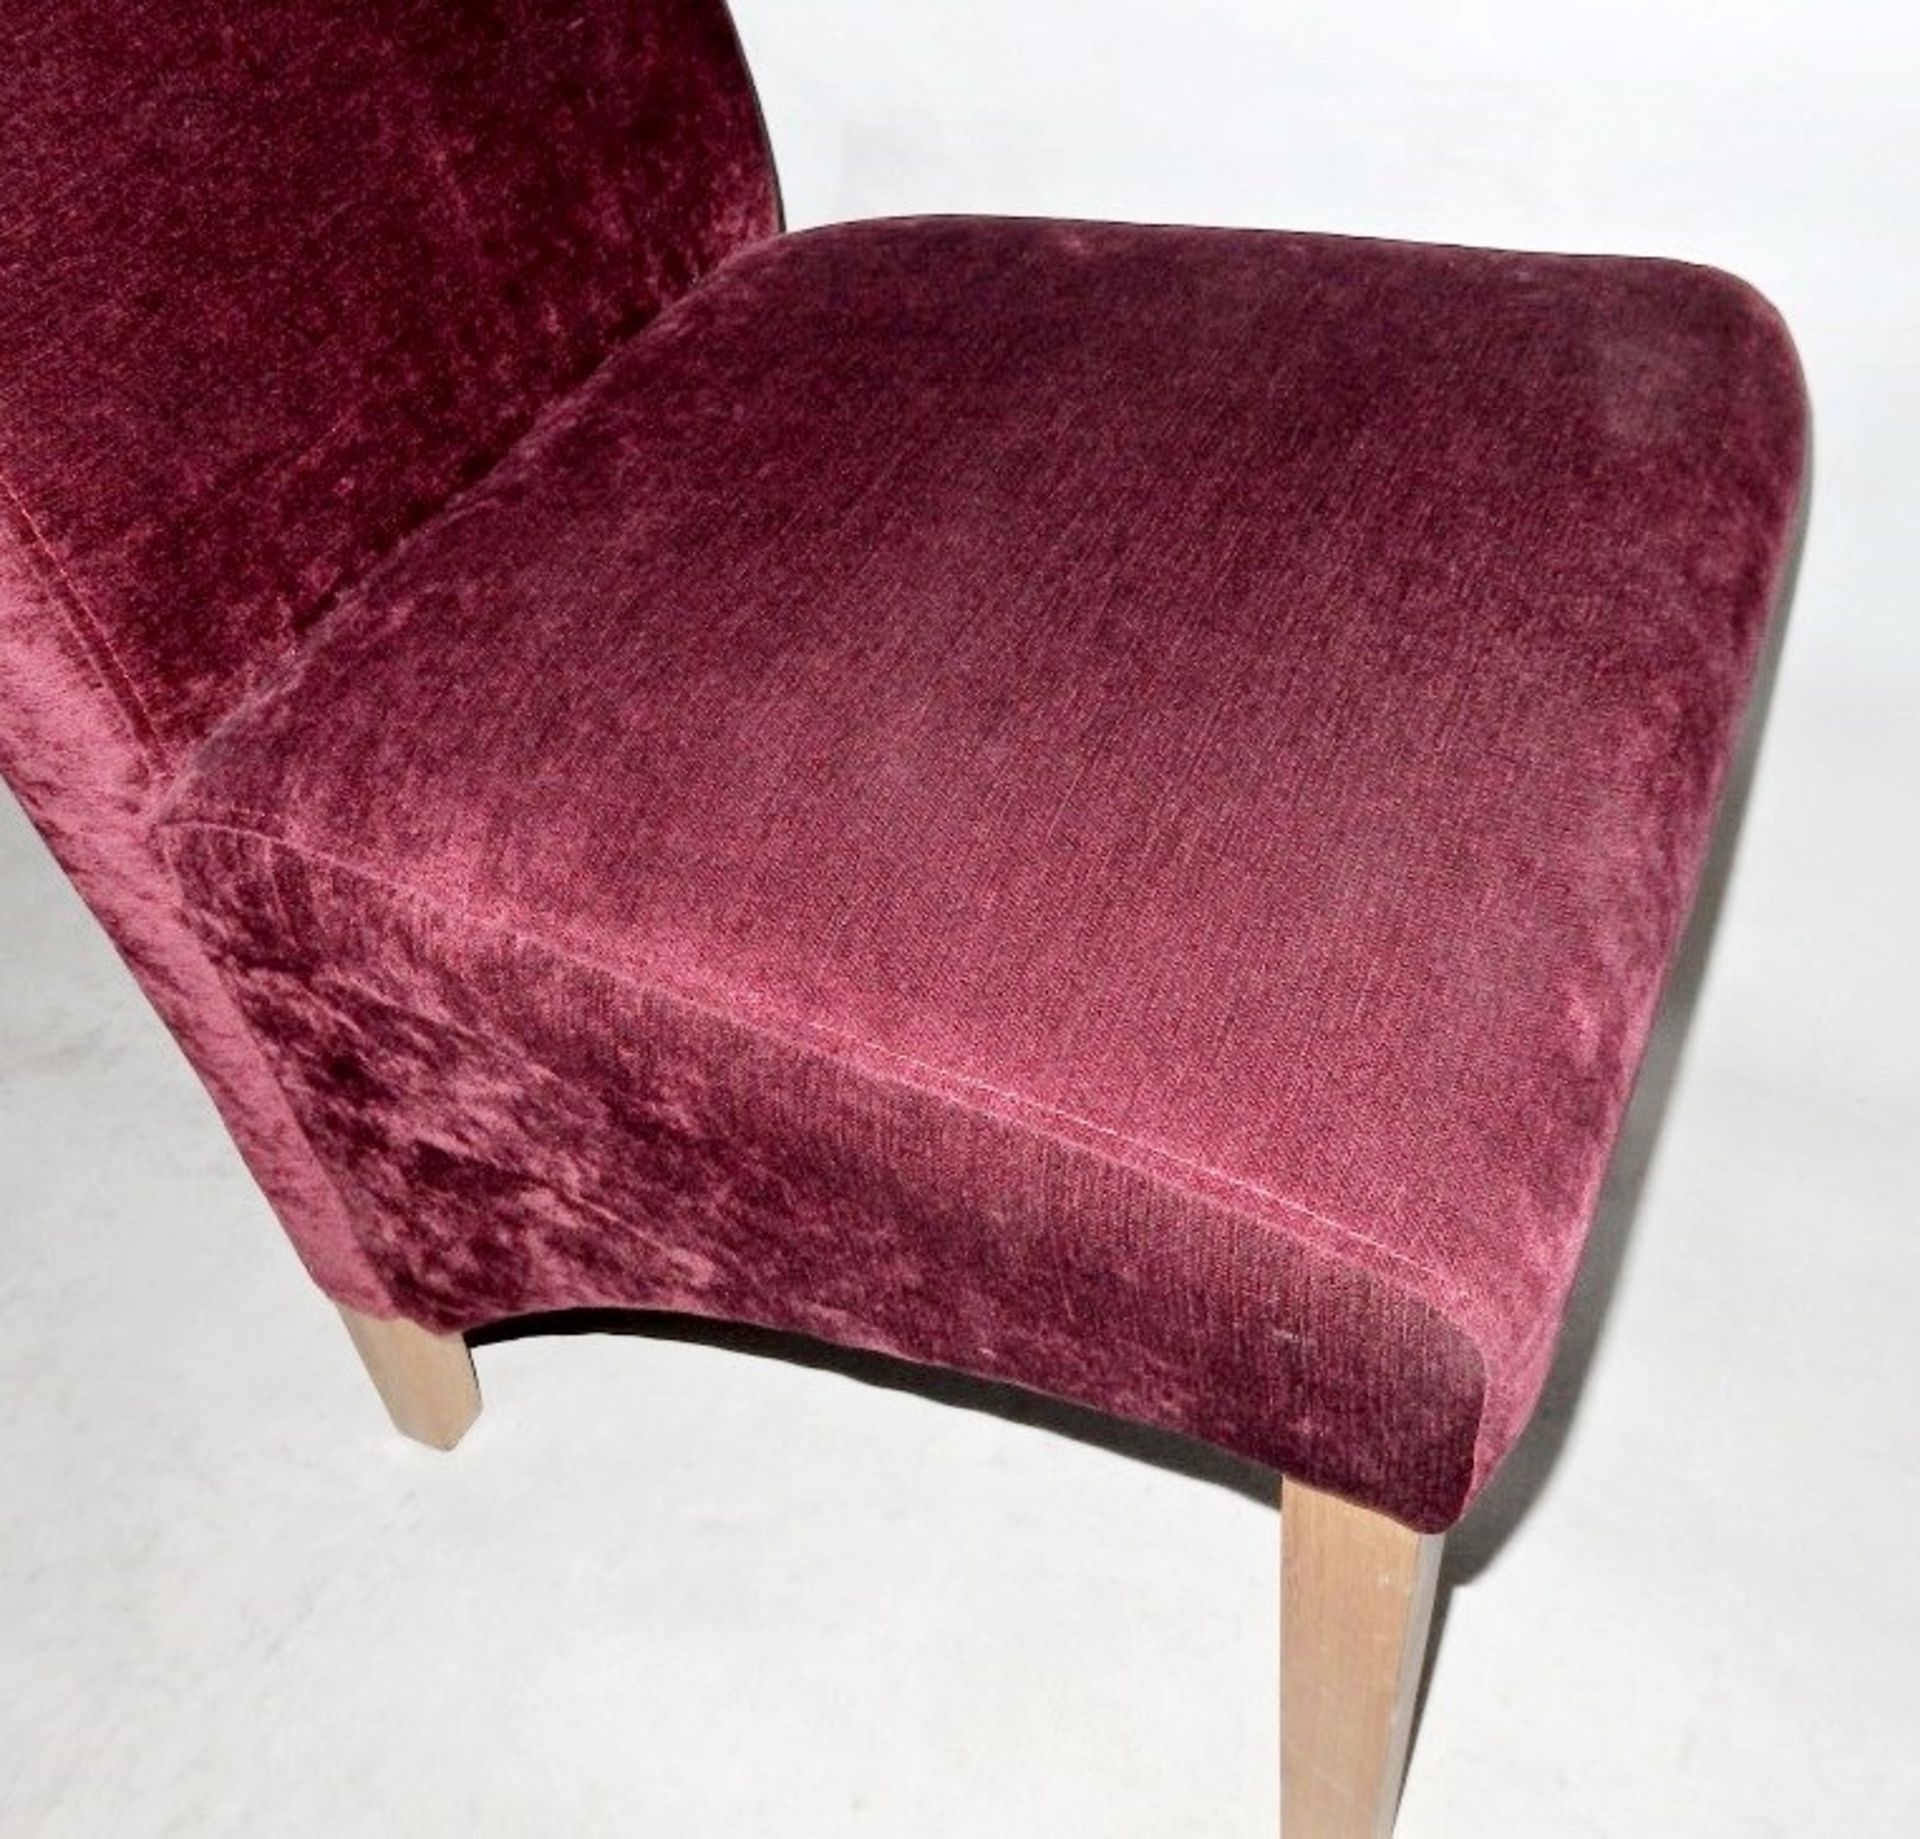 1 x Handcrafted High-back Dining Chair, Finished In A Rich Burgundy Chenille - Built & Upholstered - Image 3 of 4